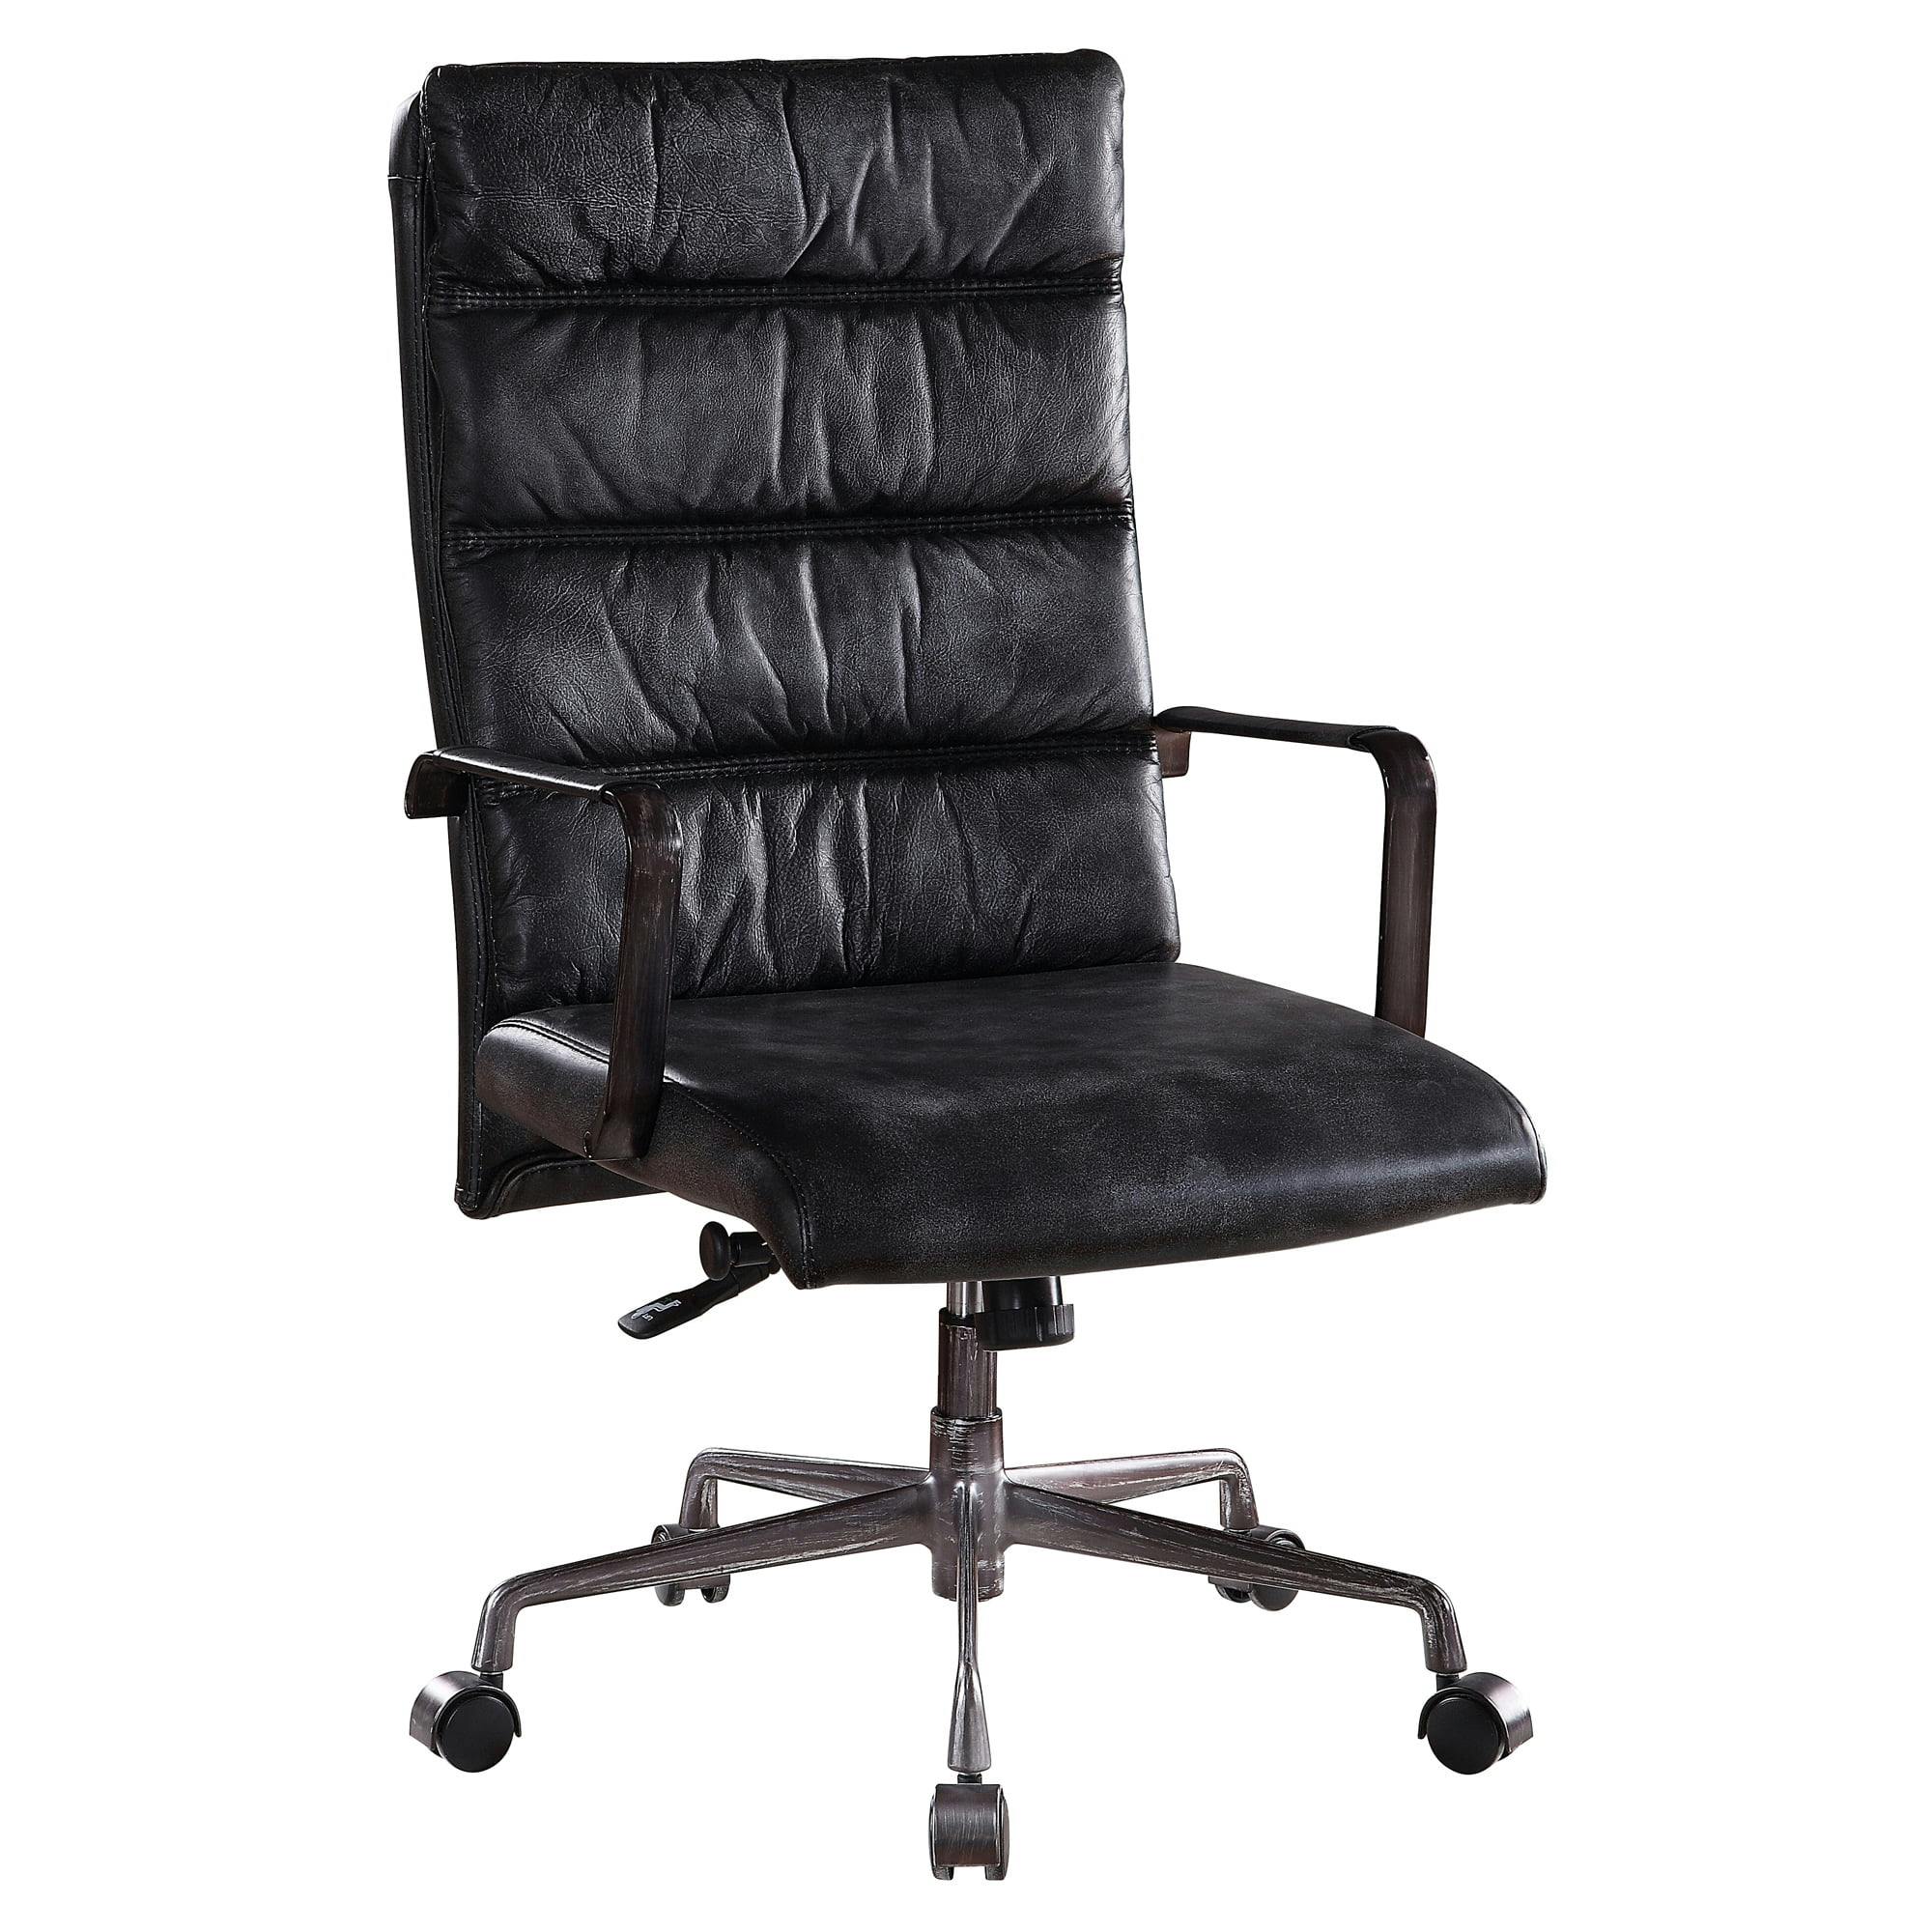 Vintage Black Top Grain Leather Executive Swivel Office Chair